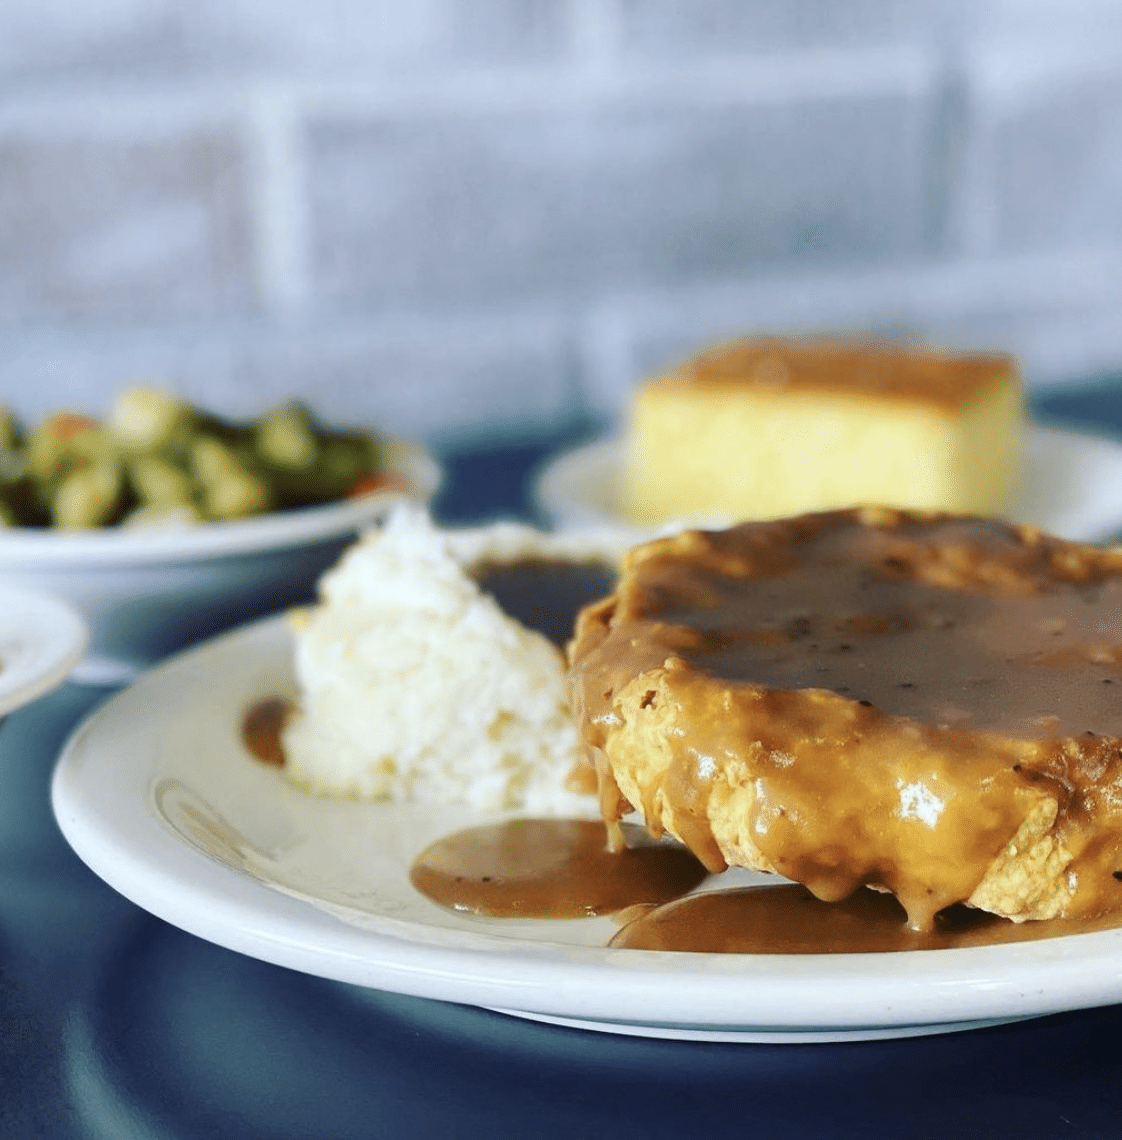 Food dripping with gravy from Cassandra's kitchen, a black owned restaurant in Houston